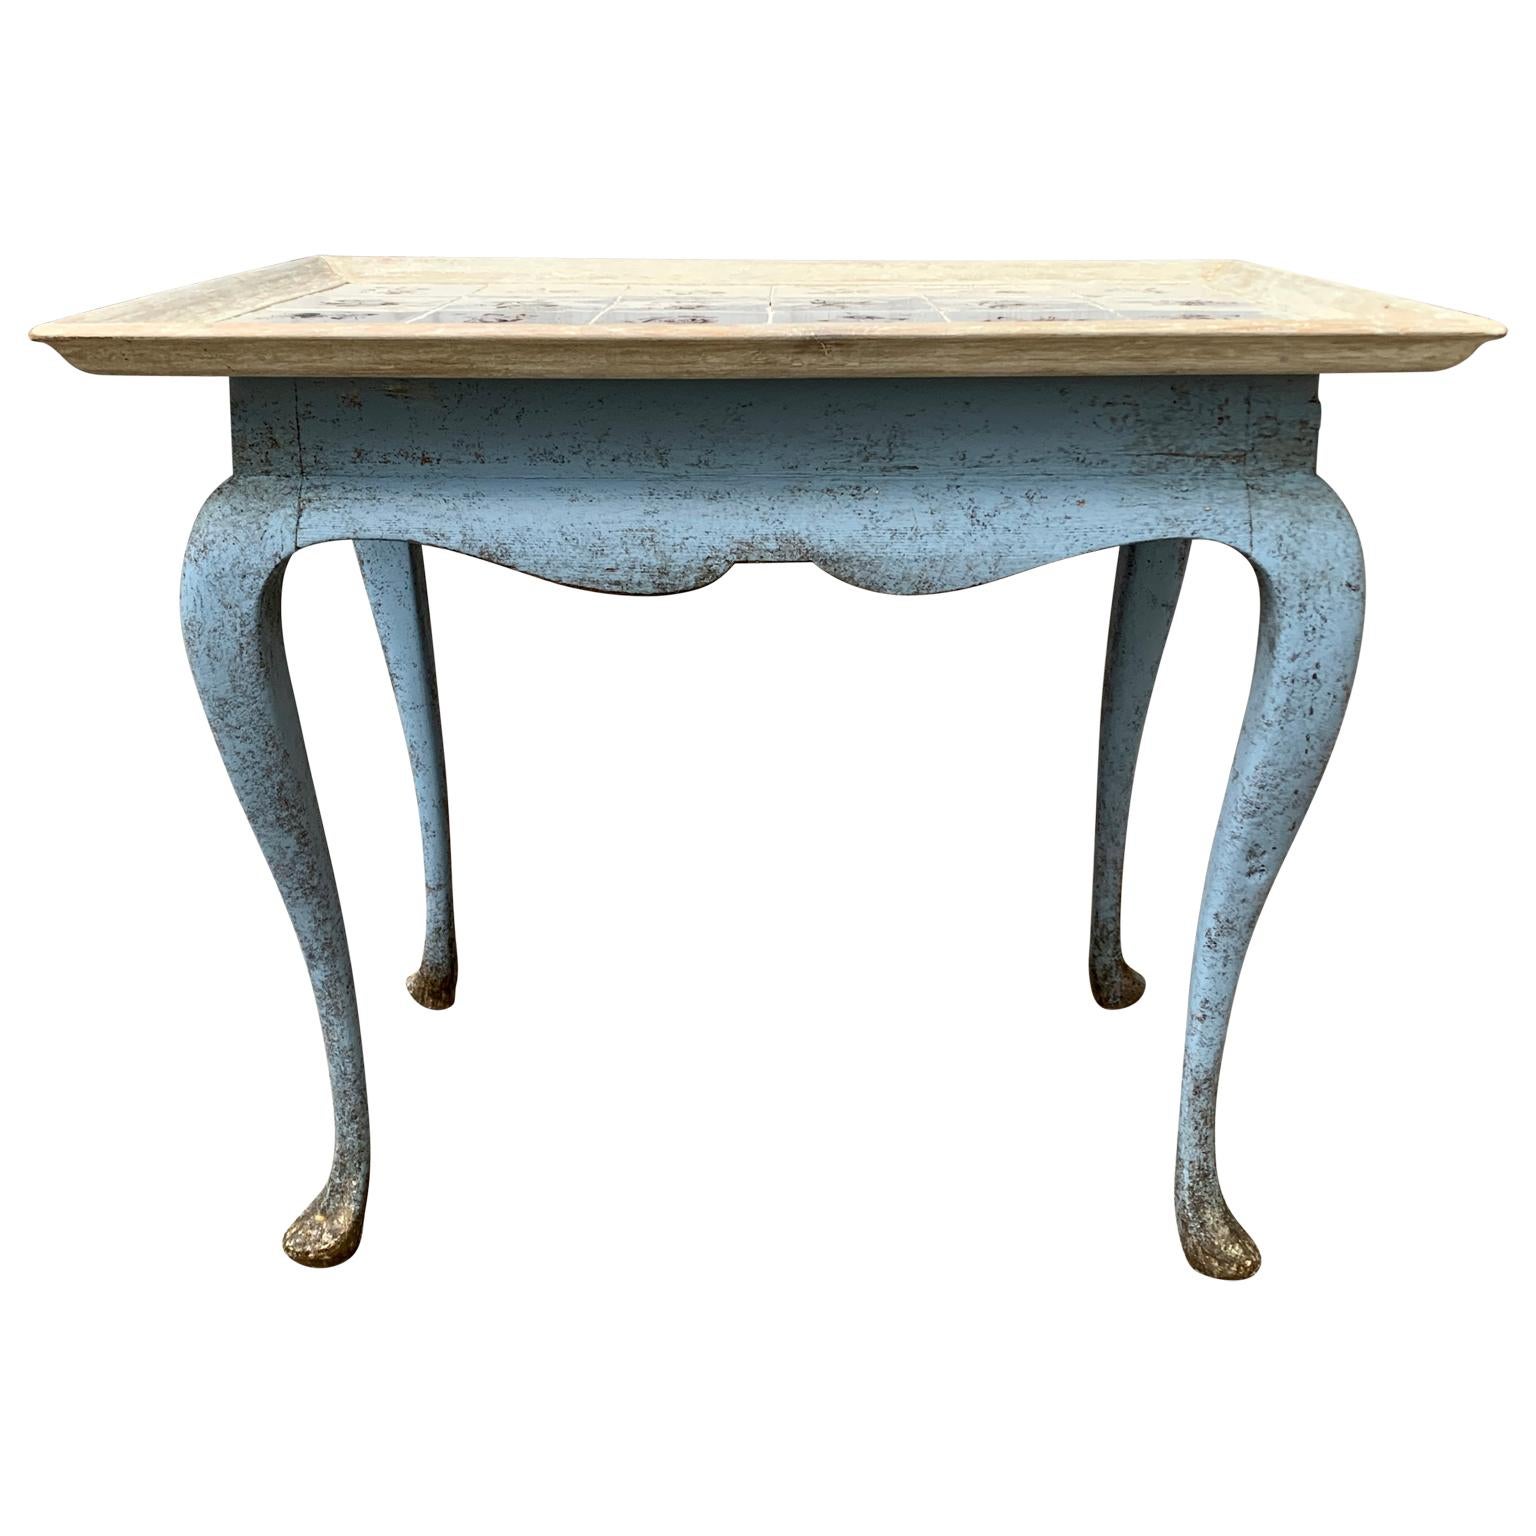 Hand-Crafted Danish 18th Century Gustavian Blue Painted Tile Table